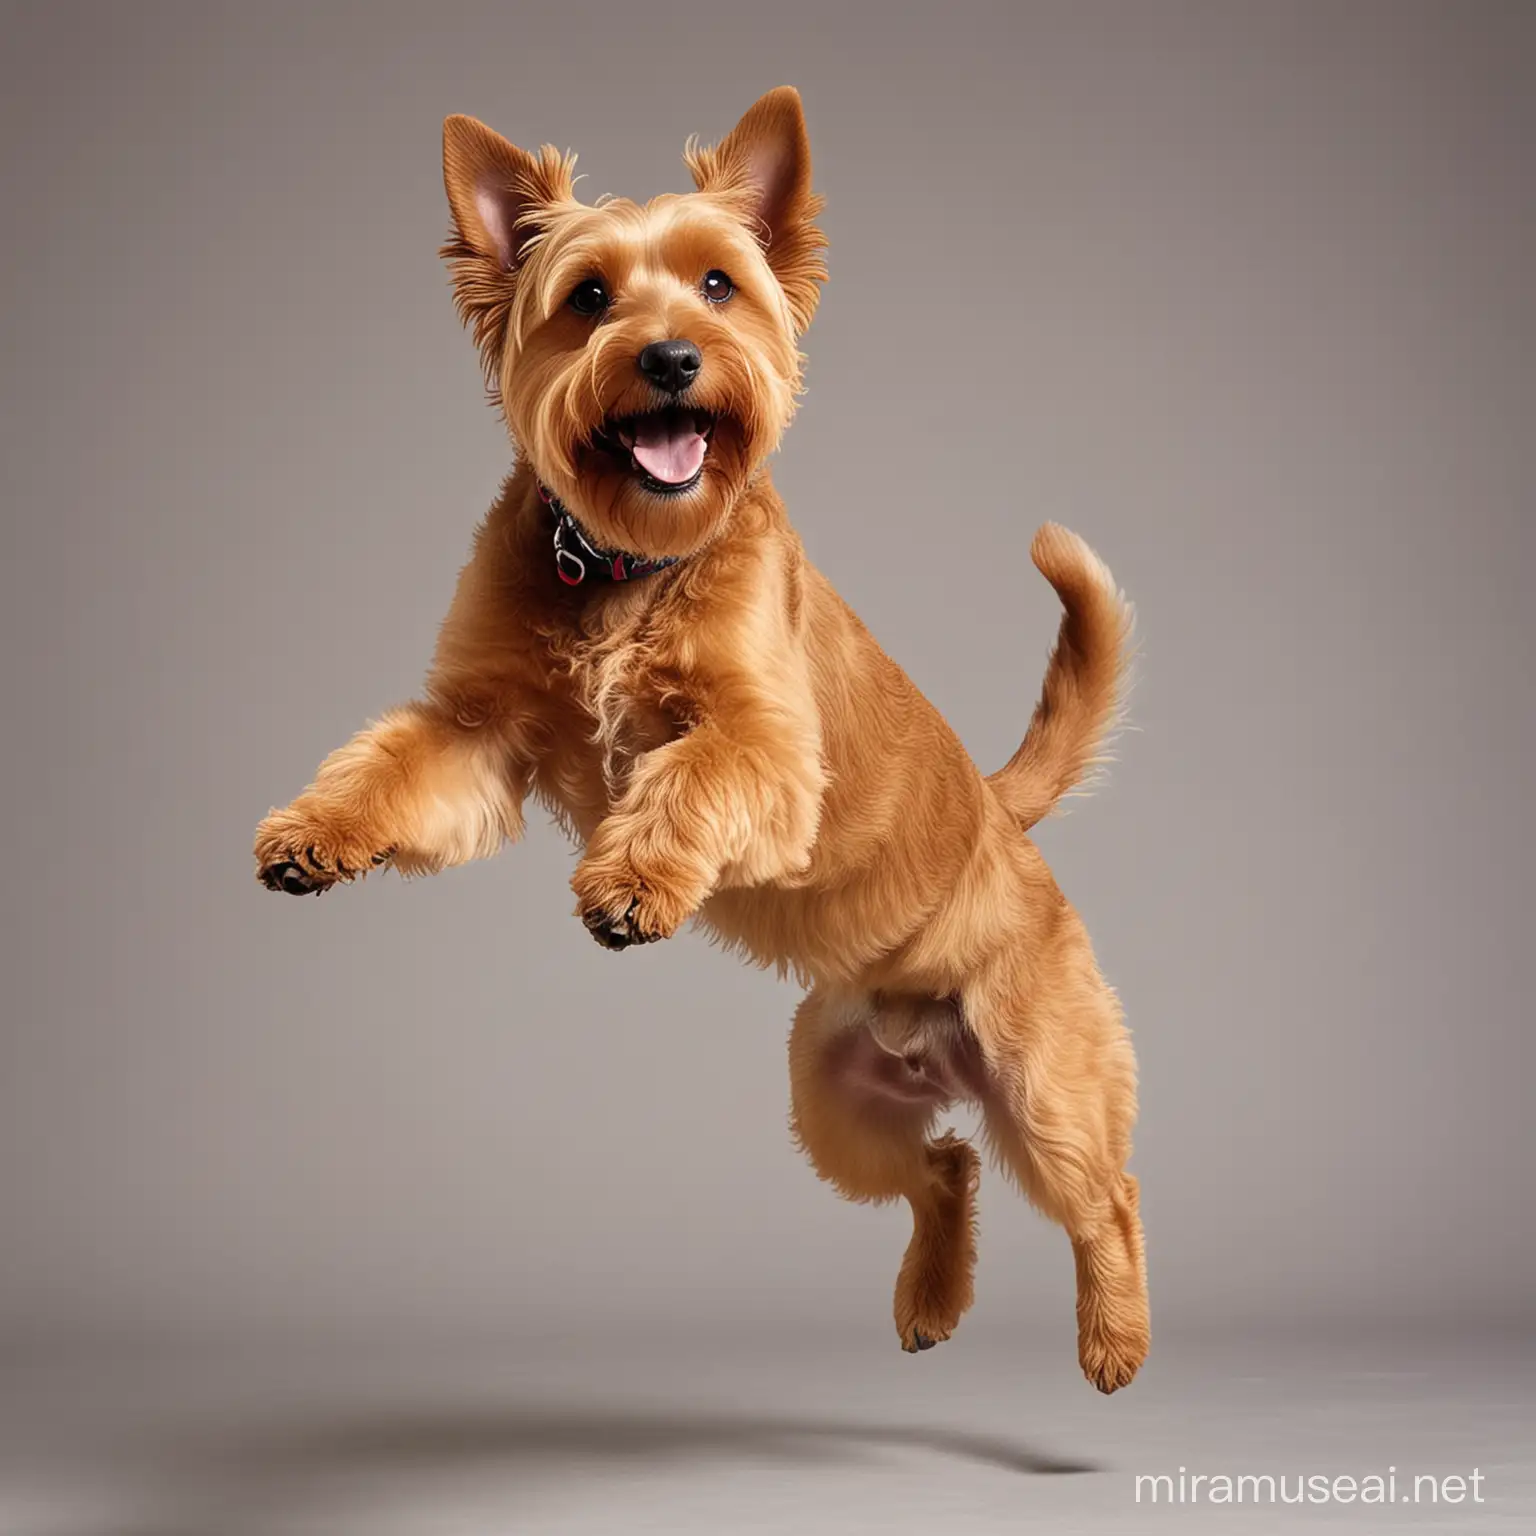 Shaggy light brown terrier dog jumping in air